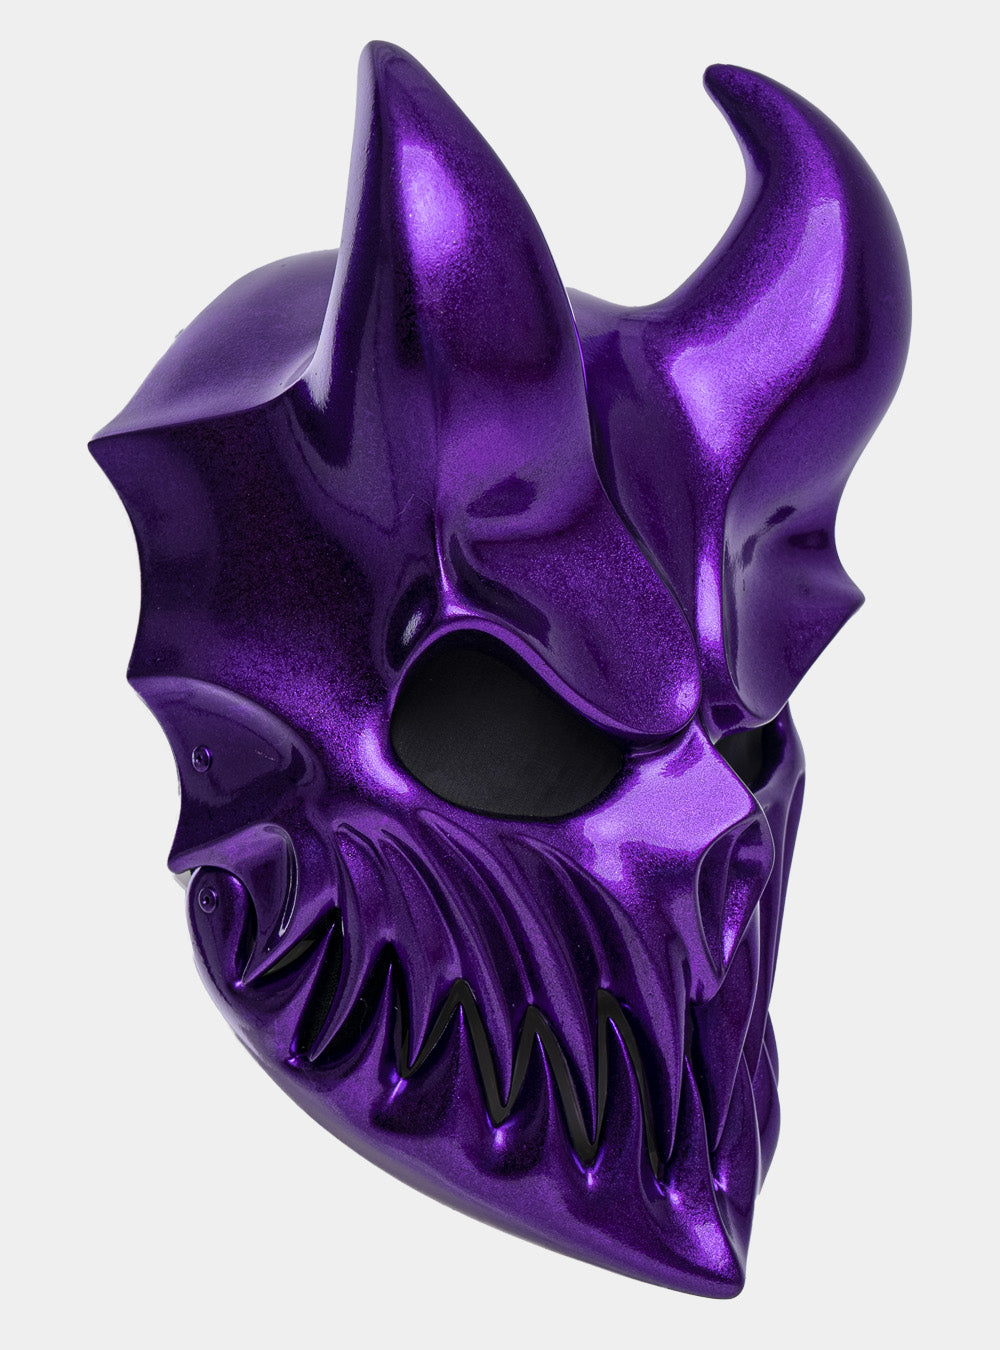 PURPLE MASK “KID OF DARKNESS” by ALEX TERRIBLE (SLAUGHTER PREVAIL) - buy KOD mask Alex Terrible store – alexterrible